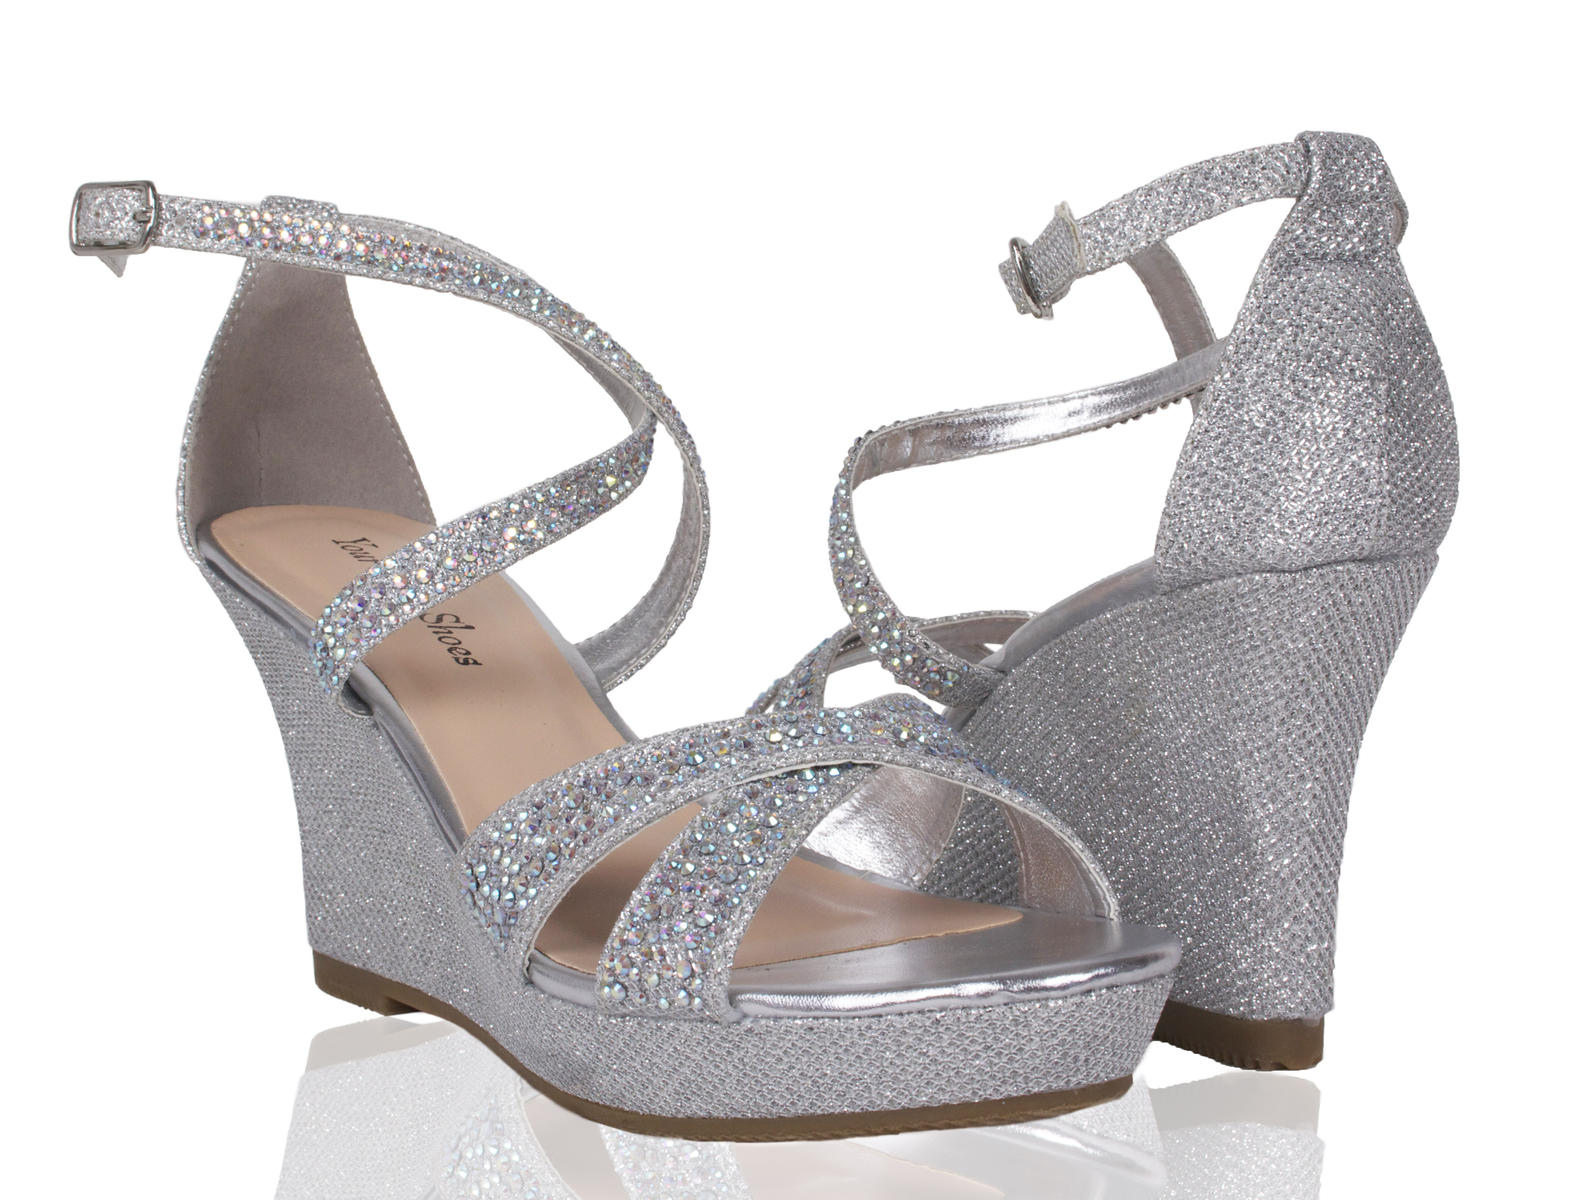 Your Party Shoes Paige Stunning Glitter High Wedge Heel with Crystal Embellished Straps & Ankle Fastener. Perfect For Prom, Homecoming or any Social, Formal or Special Occasion! Great shoes for for any Event. Rhinestone Accented straps add security for comfortable wear. Great for wide feet.  Style 714 - Black  Style 715 - Silver  Style 716 - Nude  Description: Heel Height: 2 3/4 Platform Height: 1  Available Sizes: 5, 5.5, 6, 6.5, 7, 7.5, 8, 8.5, 9, 9.5, 10, 10.5, 11